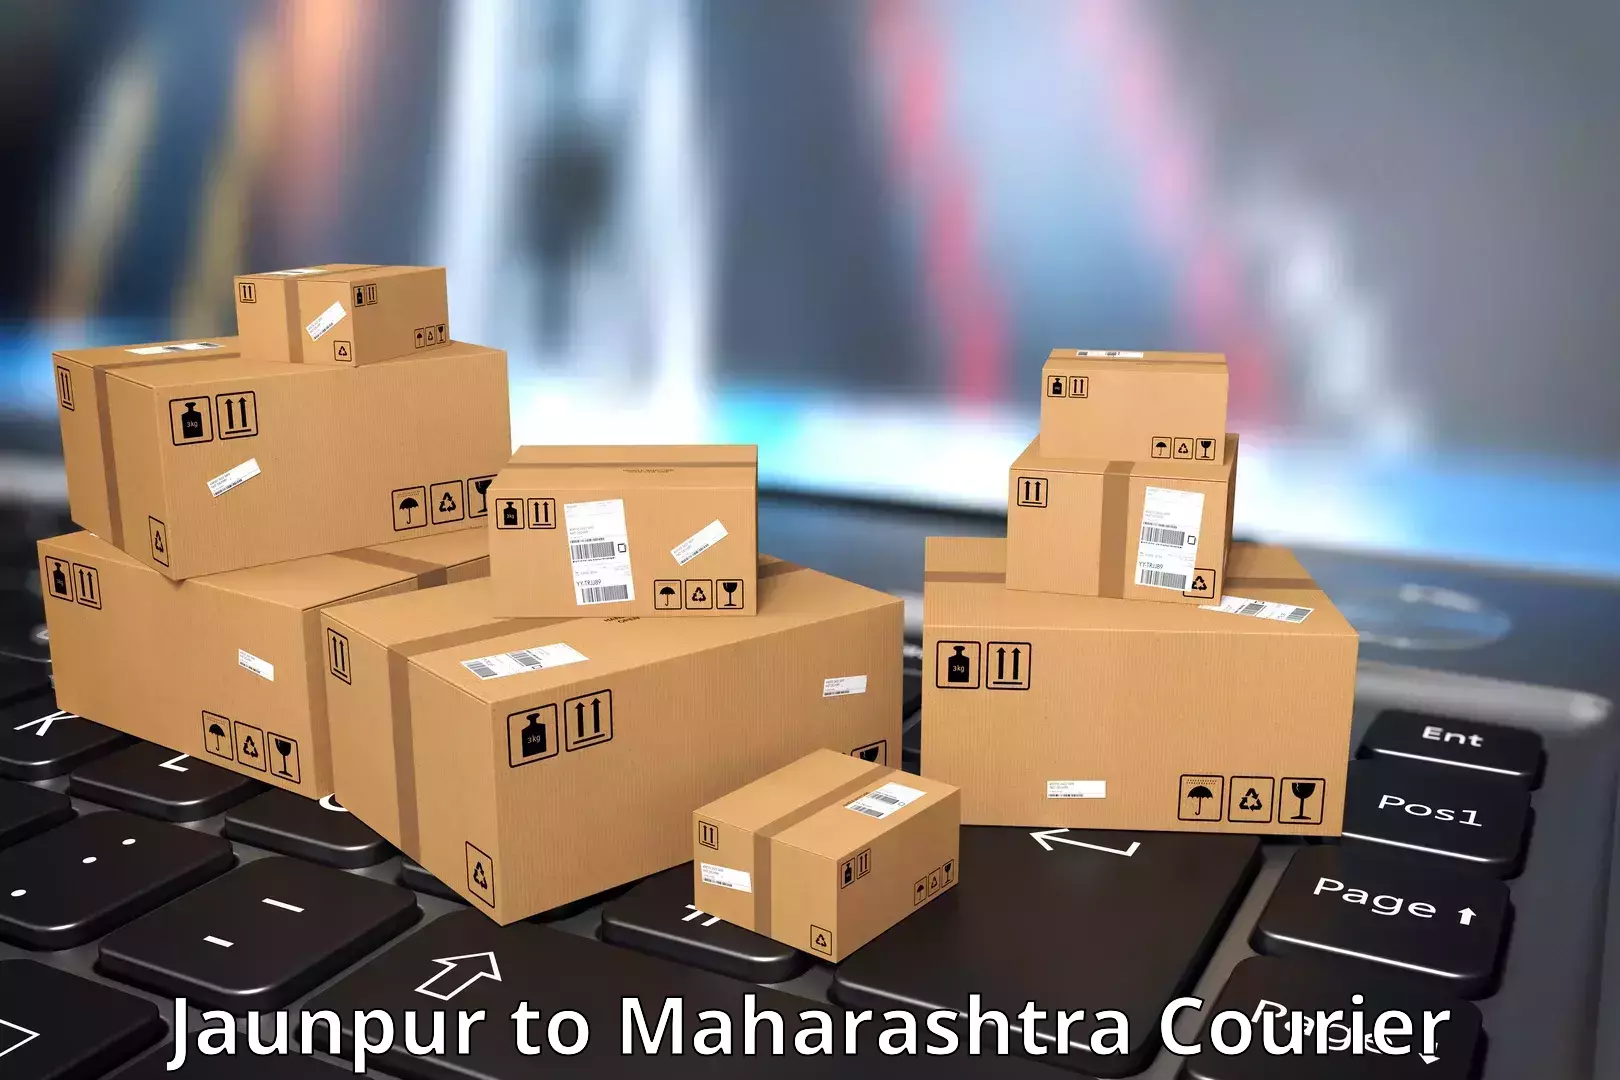 Efficient courier operations Jaunpur to Bhiwandi